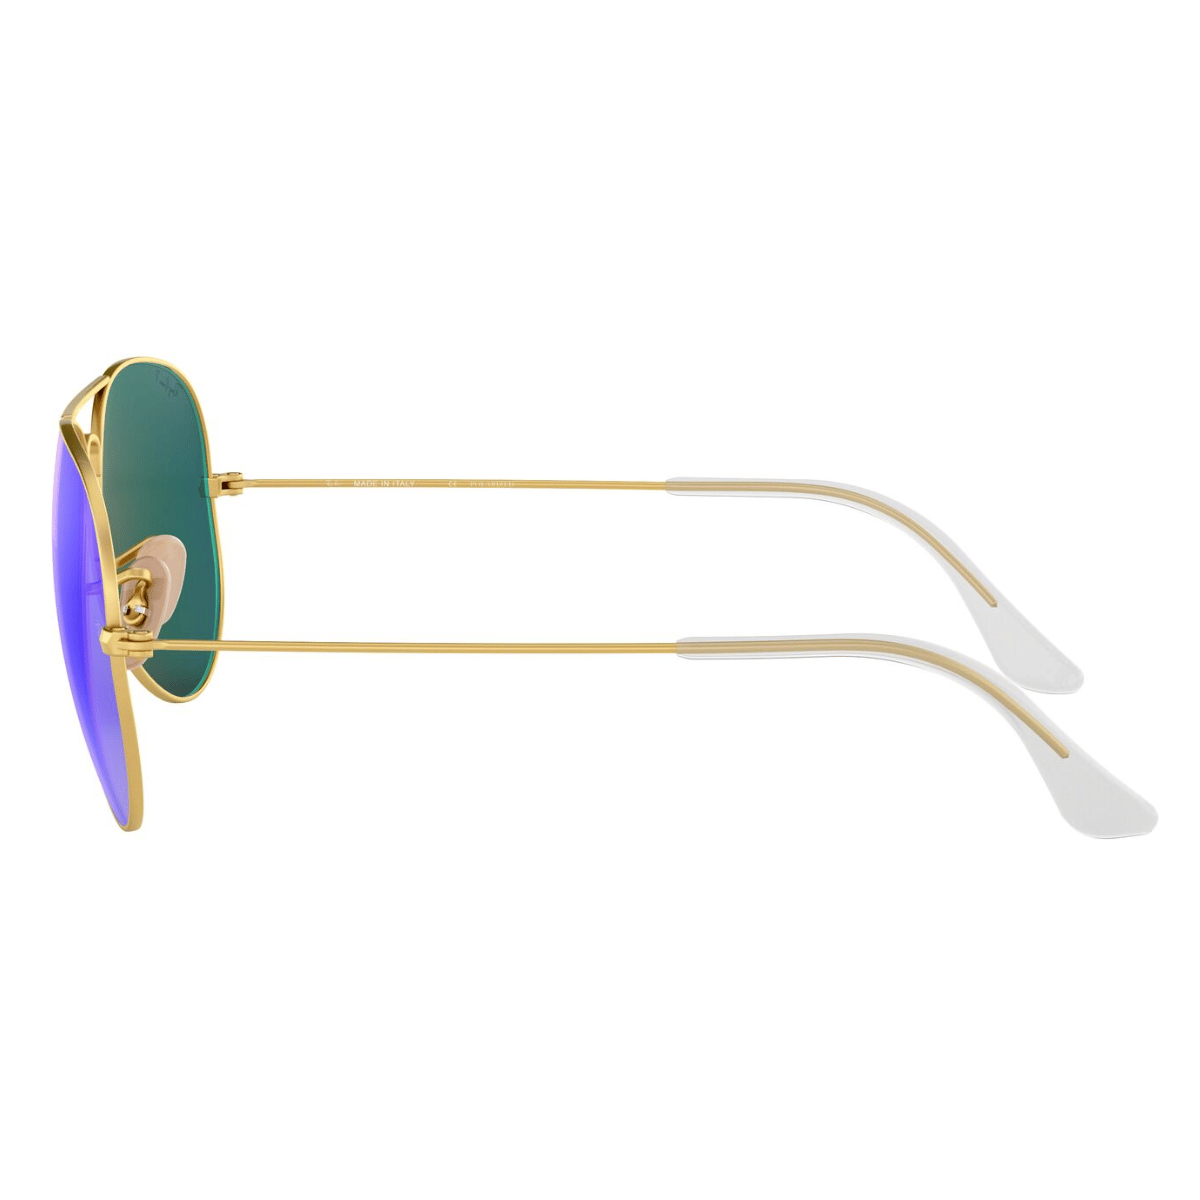 "Ray-Ban RB3025 112/4L 58-14 Aviator Sunglasses: Find your perfect pair at Optorium. Choose from a range of colors including brown mirror gold, green mirror silver, brown mirror pink, and crystal green mirror. Elevate your style with brand new Ray-Ban sunglasses today!"